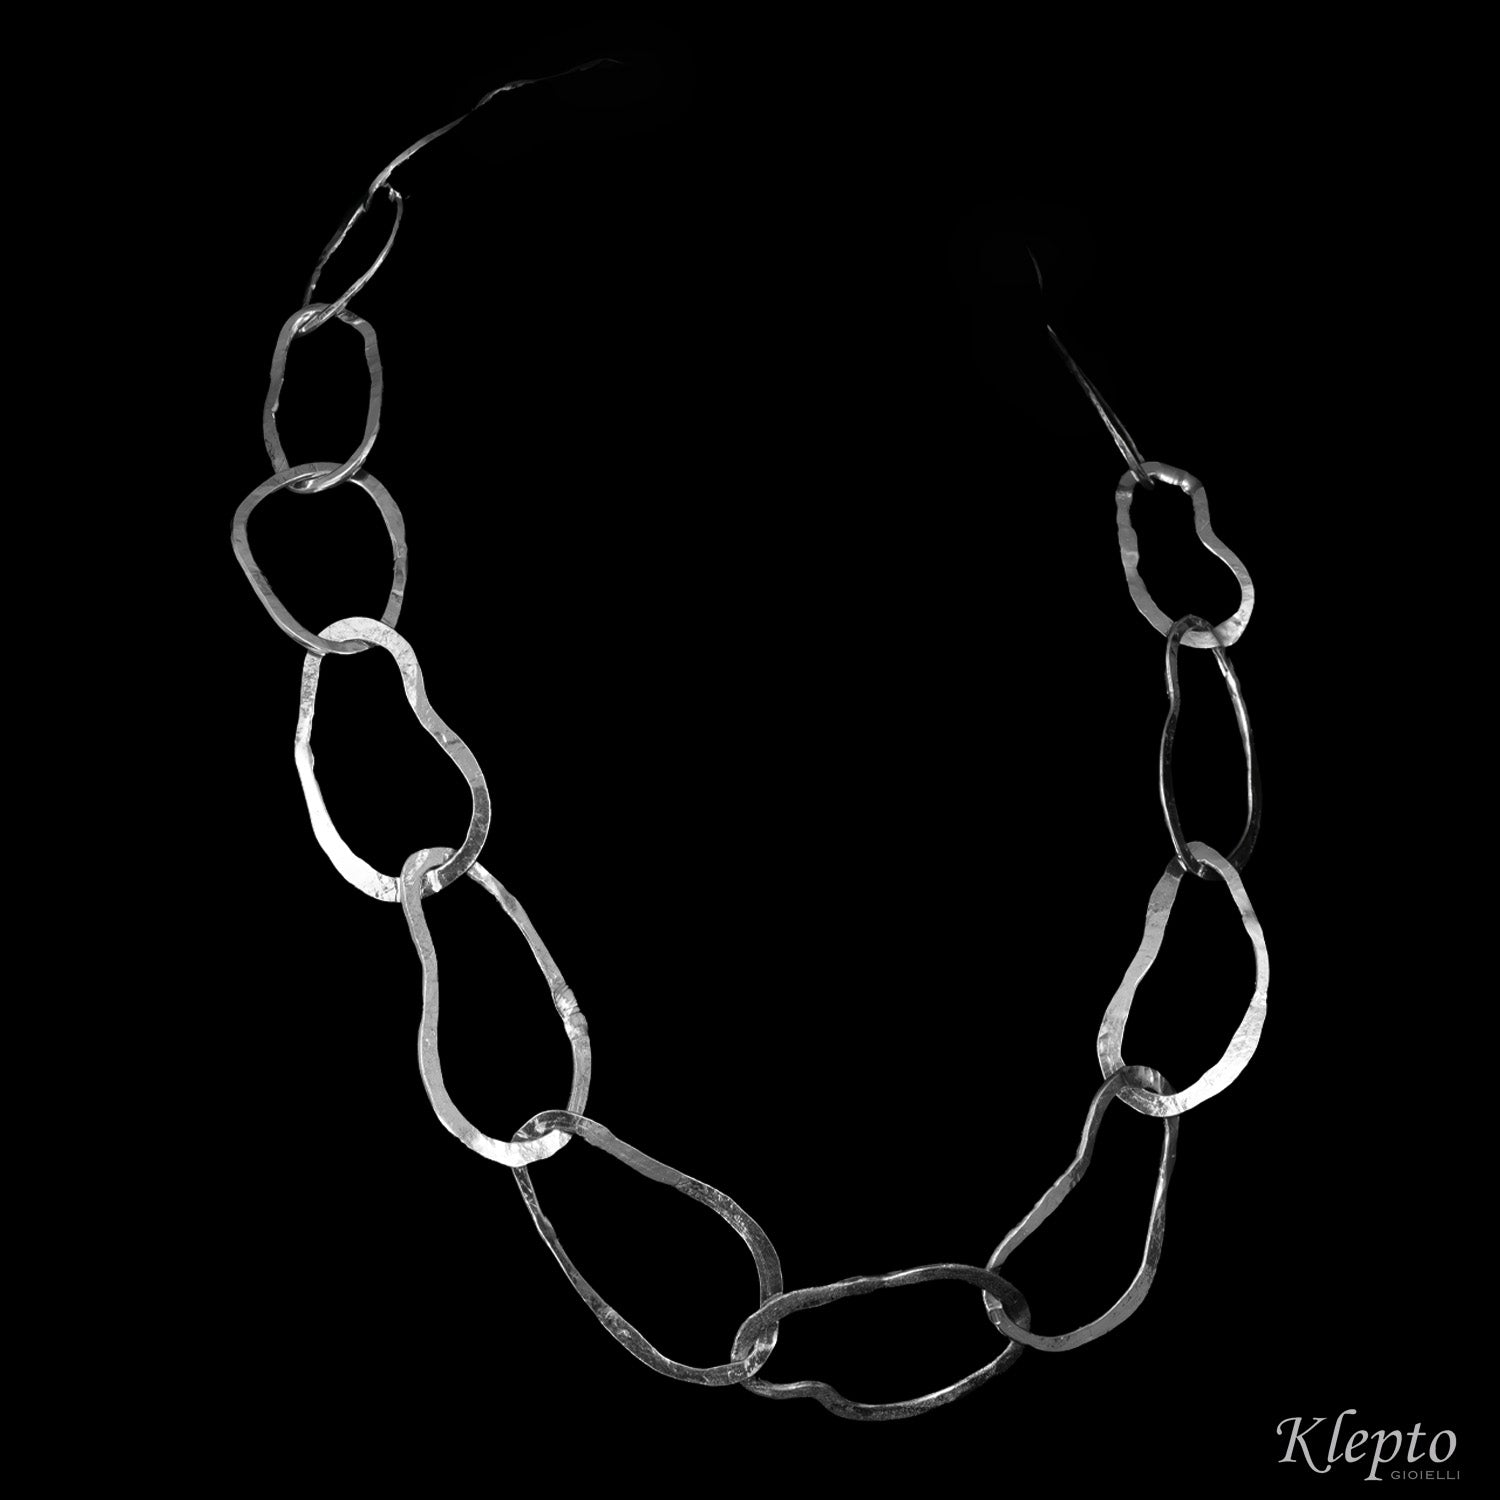 Necklace in Silnova® Silver with hammered oval rings